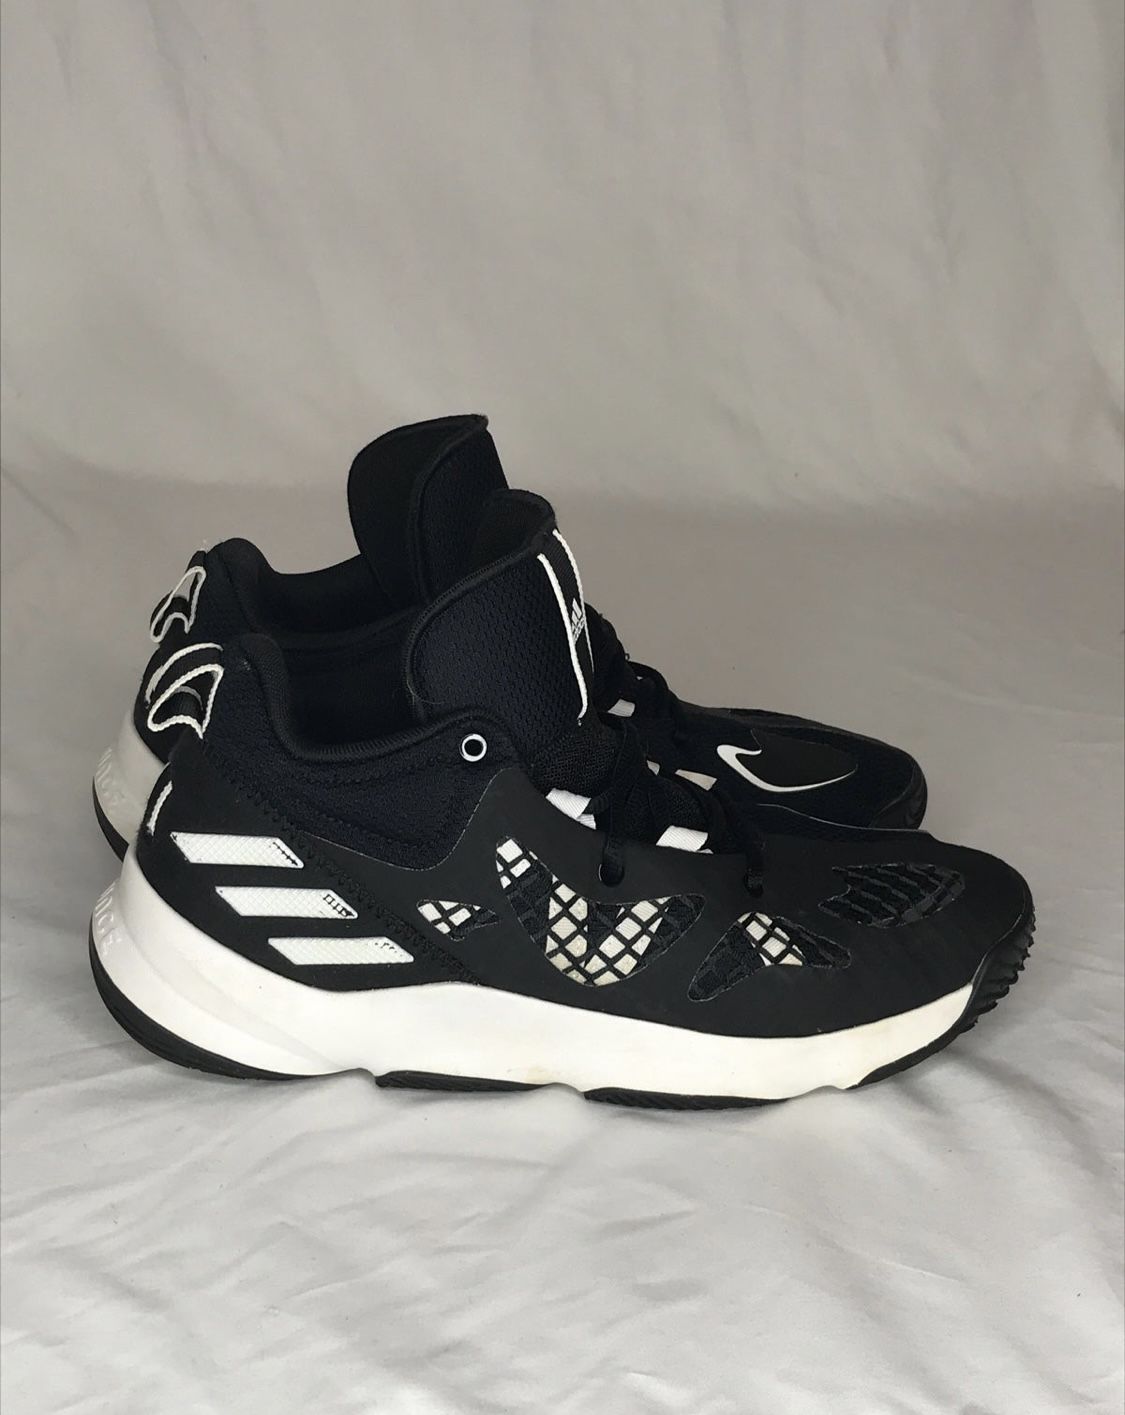 Adidas Size 10 Mad Bounce Black and White Basketball Shoes LVL 029002 Gently used